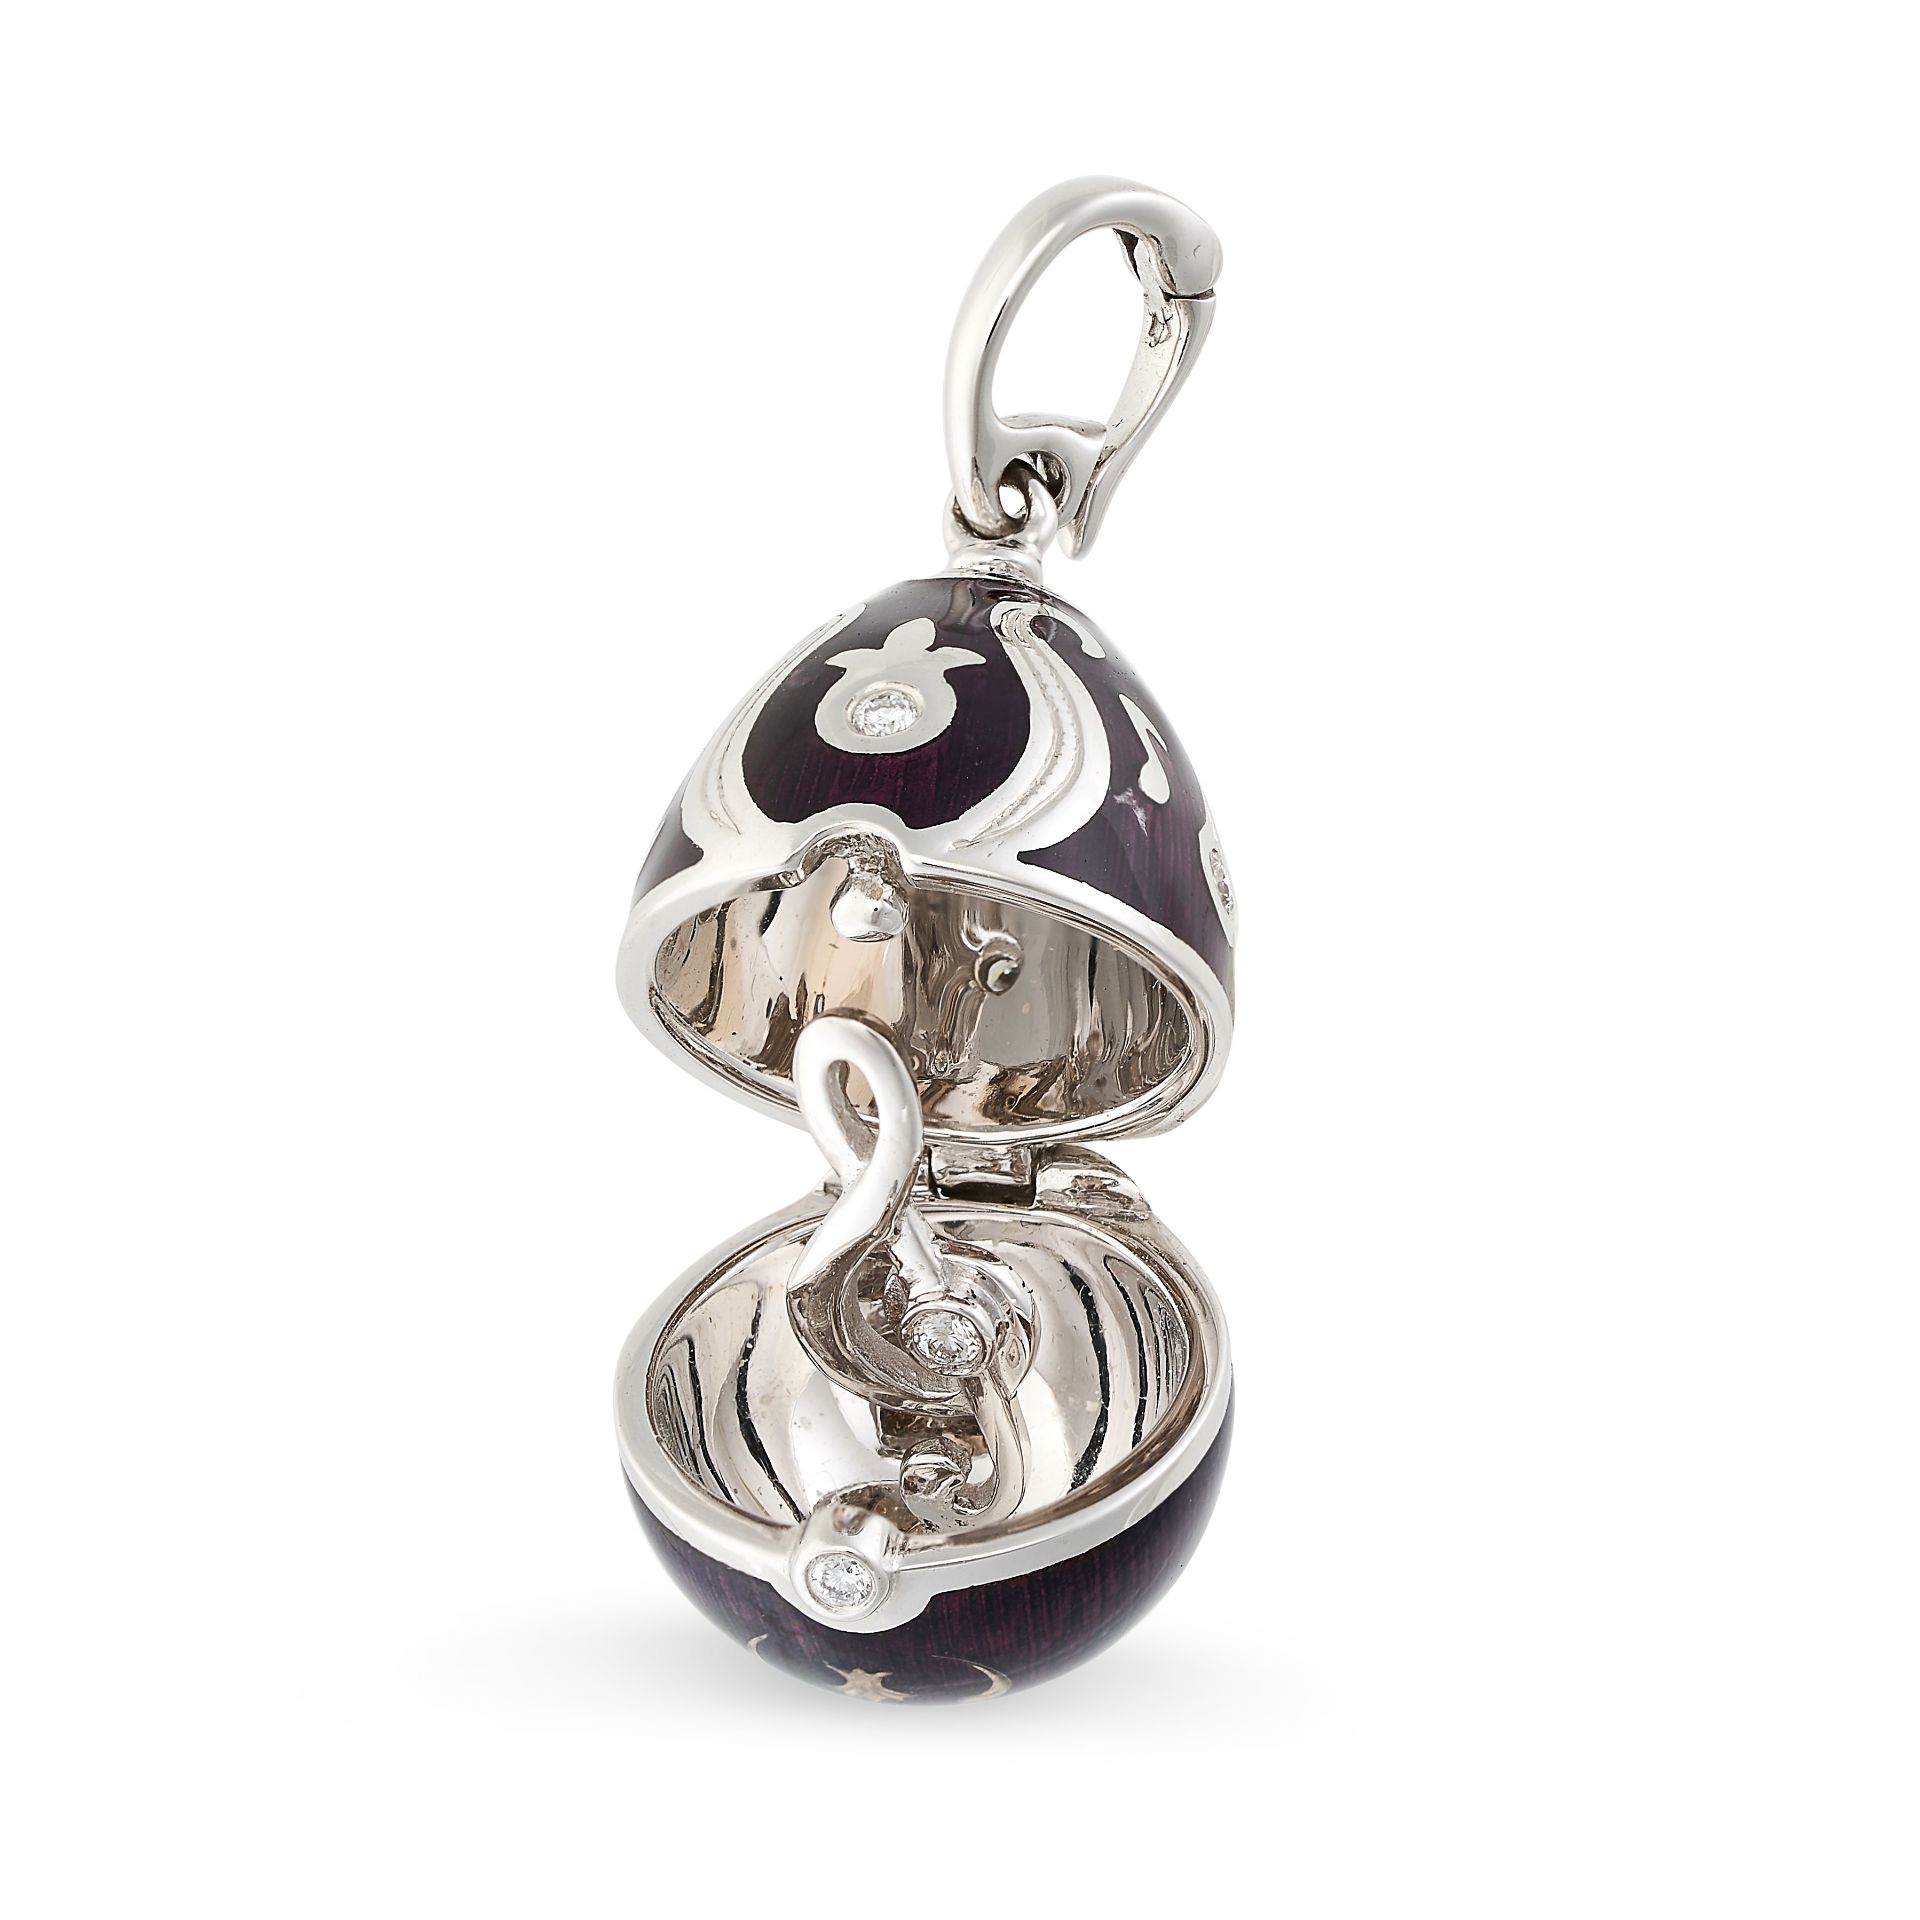 FABERGE, AN ENAMEL AND DIAMOND EGG CHARM / PENDANT in 18ct white gold, designed as a hinged egg d... - Image 2 of 2